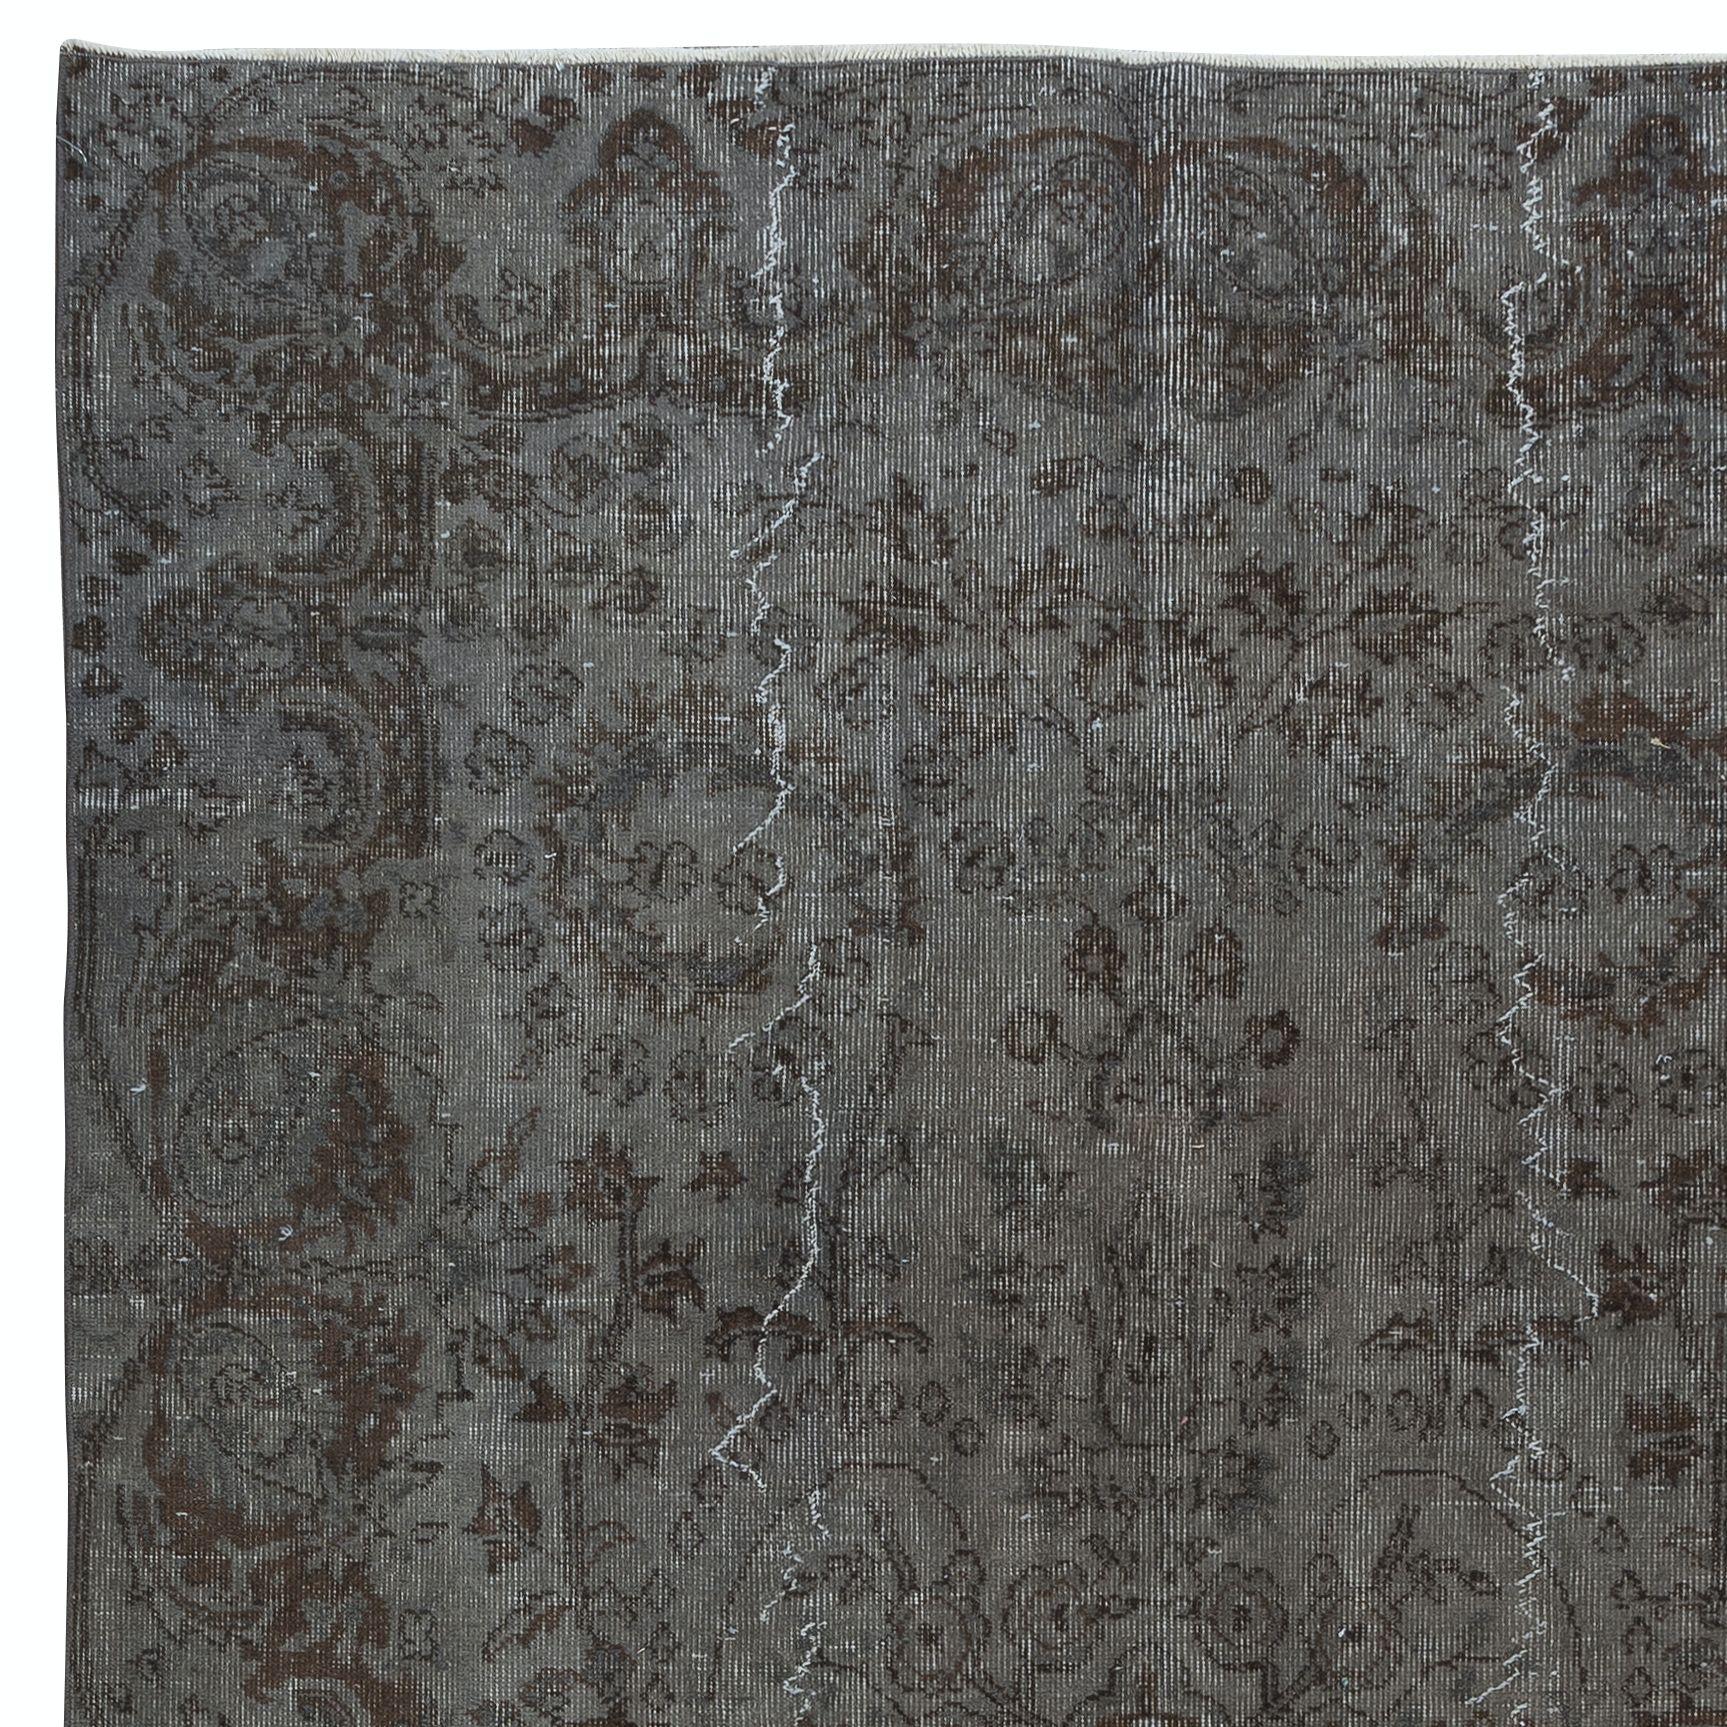 Modern 5.7x8.7 Ft Rustic Handmade Turkish Sparta Area Rug. Gray & Brown Colors For Sale